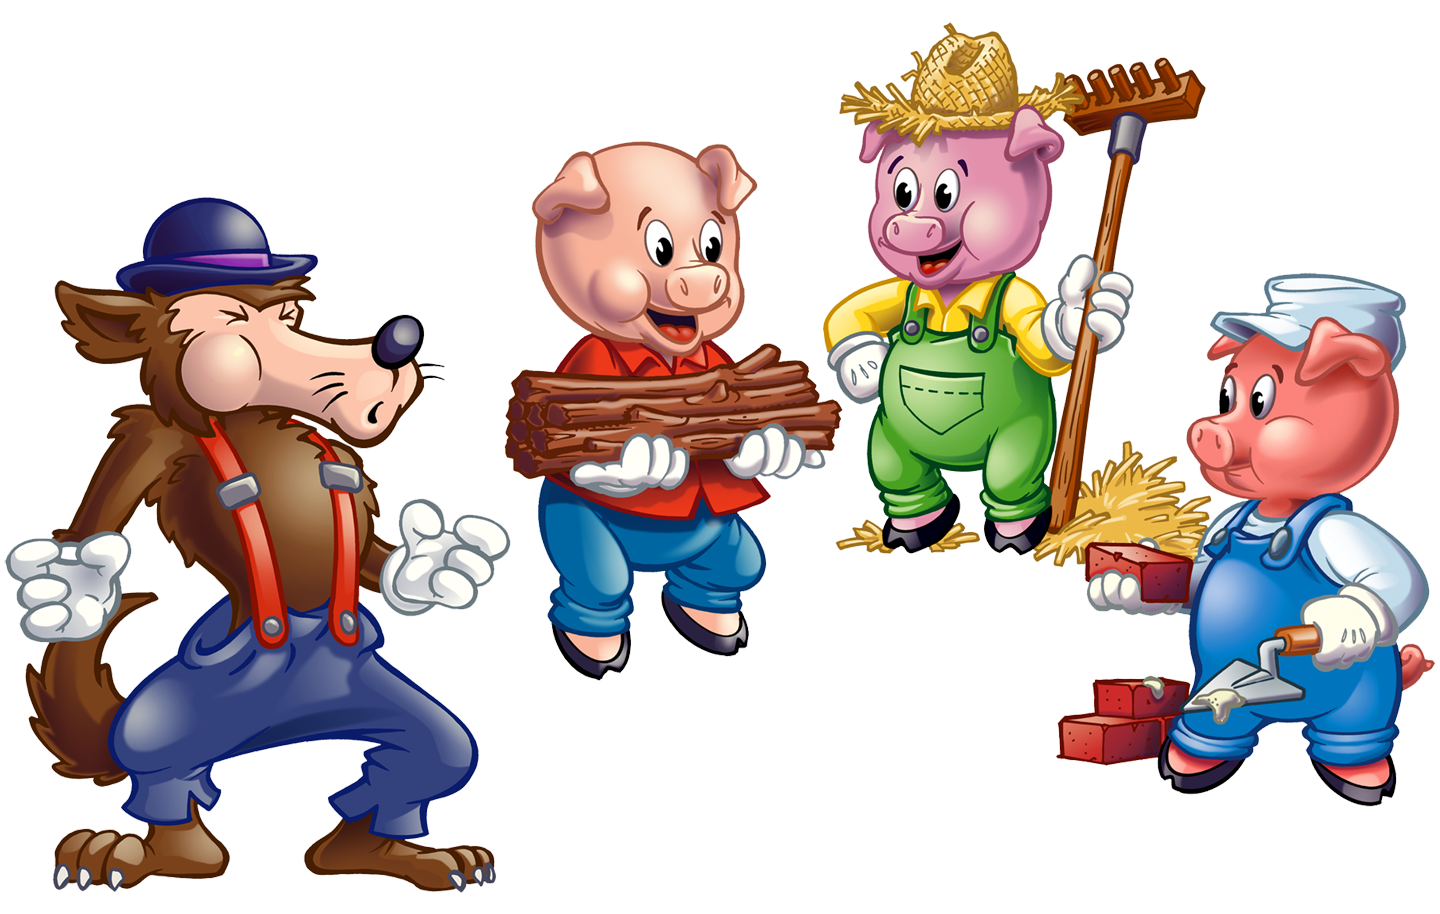 Three Little Pigs Clipart. Pig picture, Three little pigs story, Little pigs